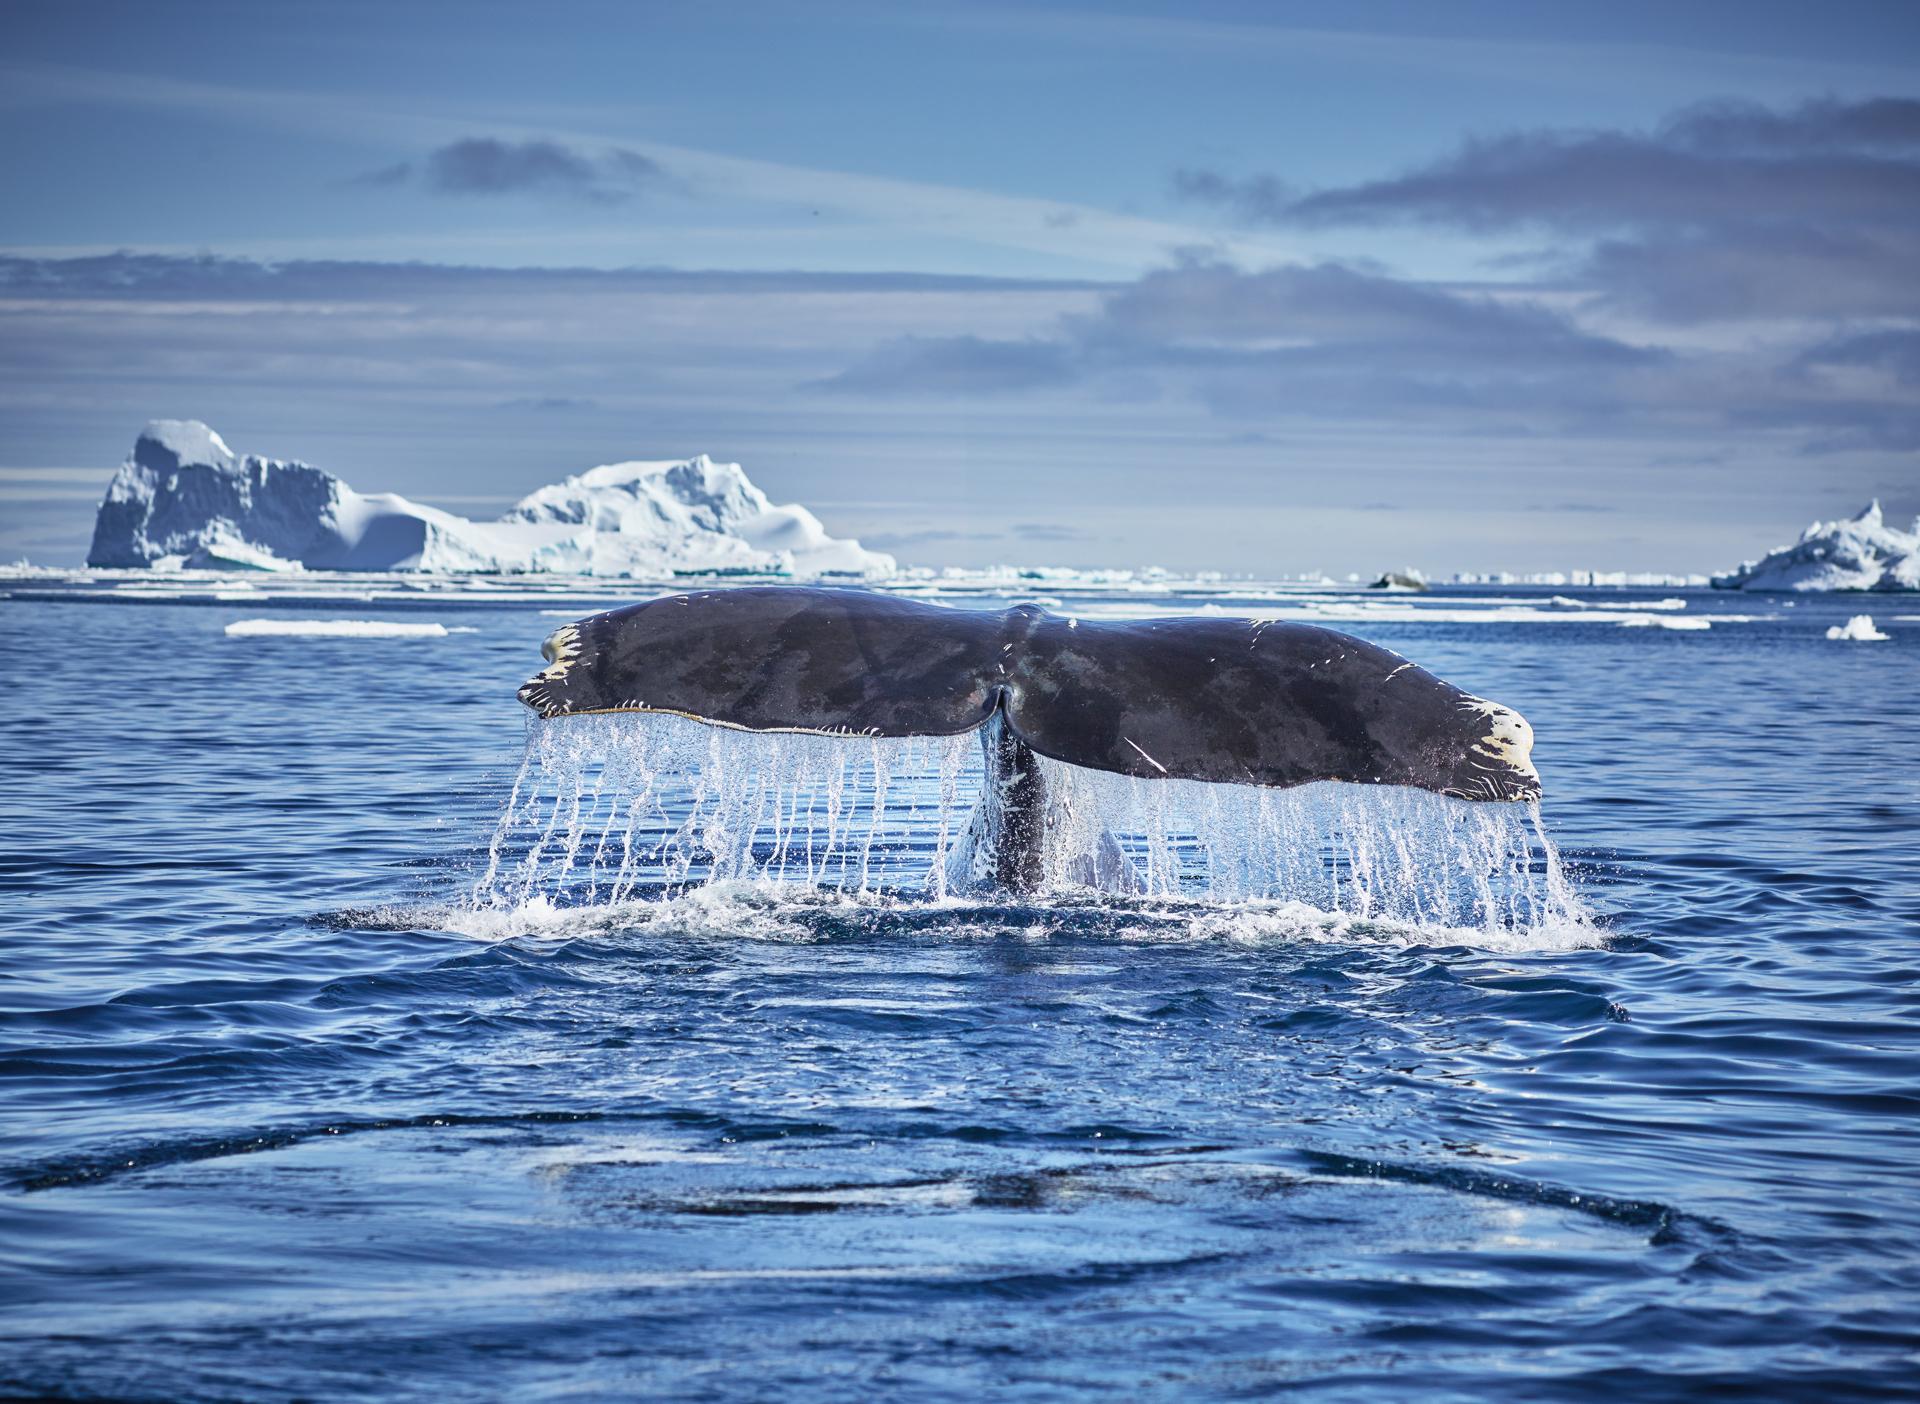 New York Photography Awards Winner - The Humpback Whale